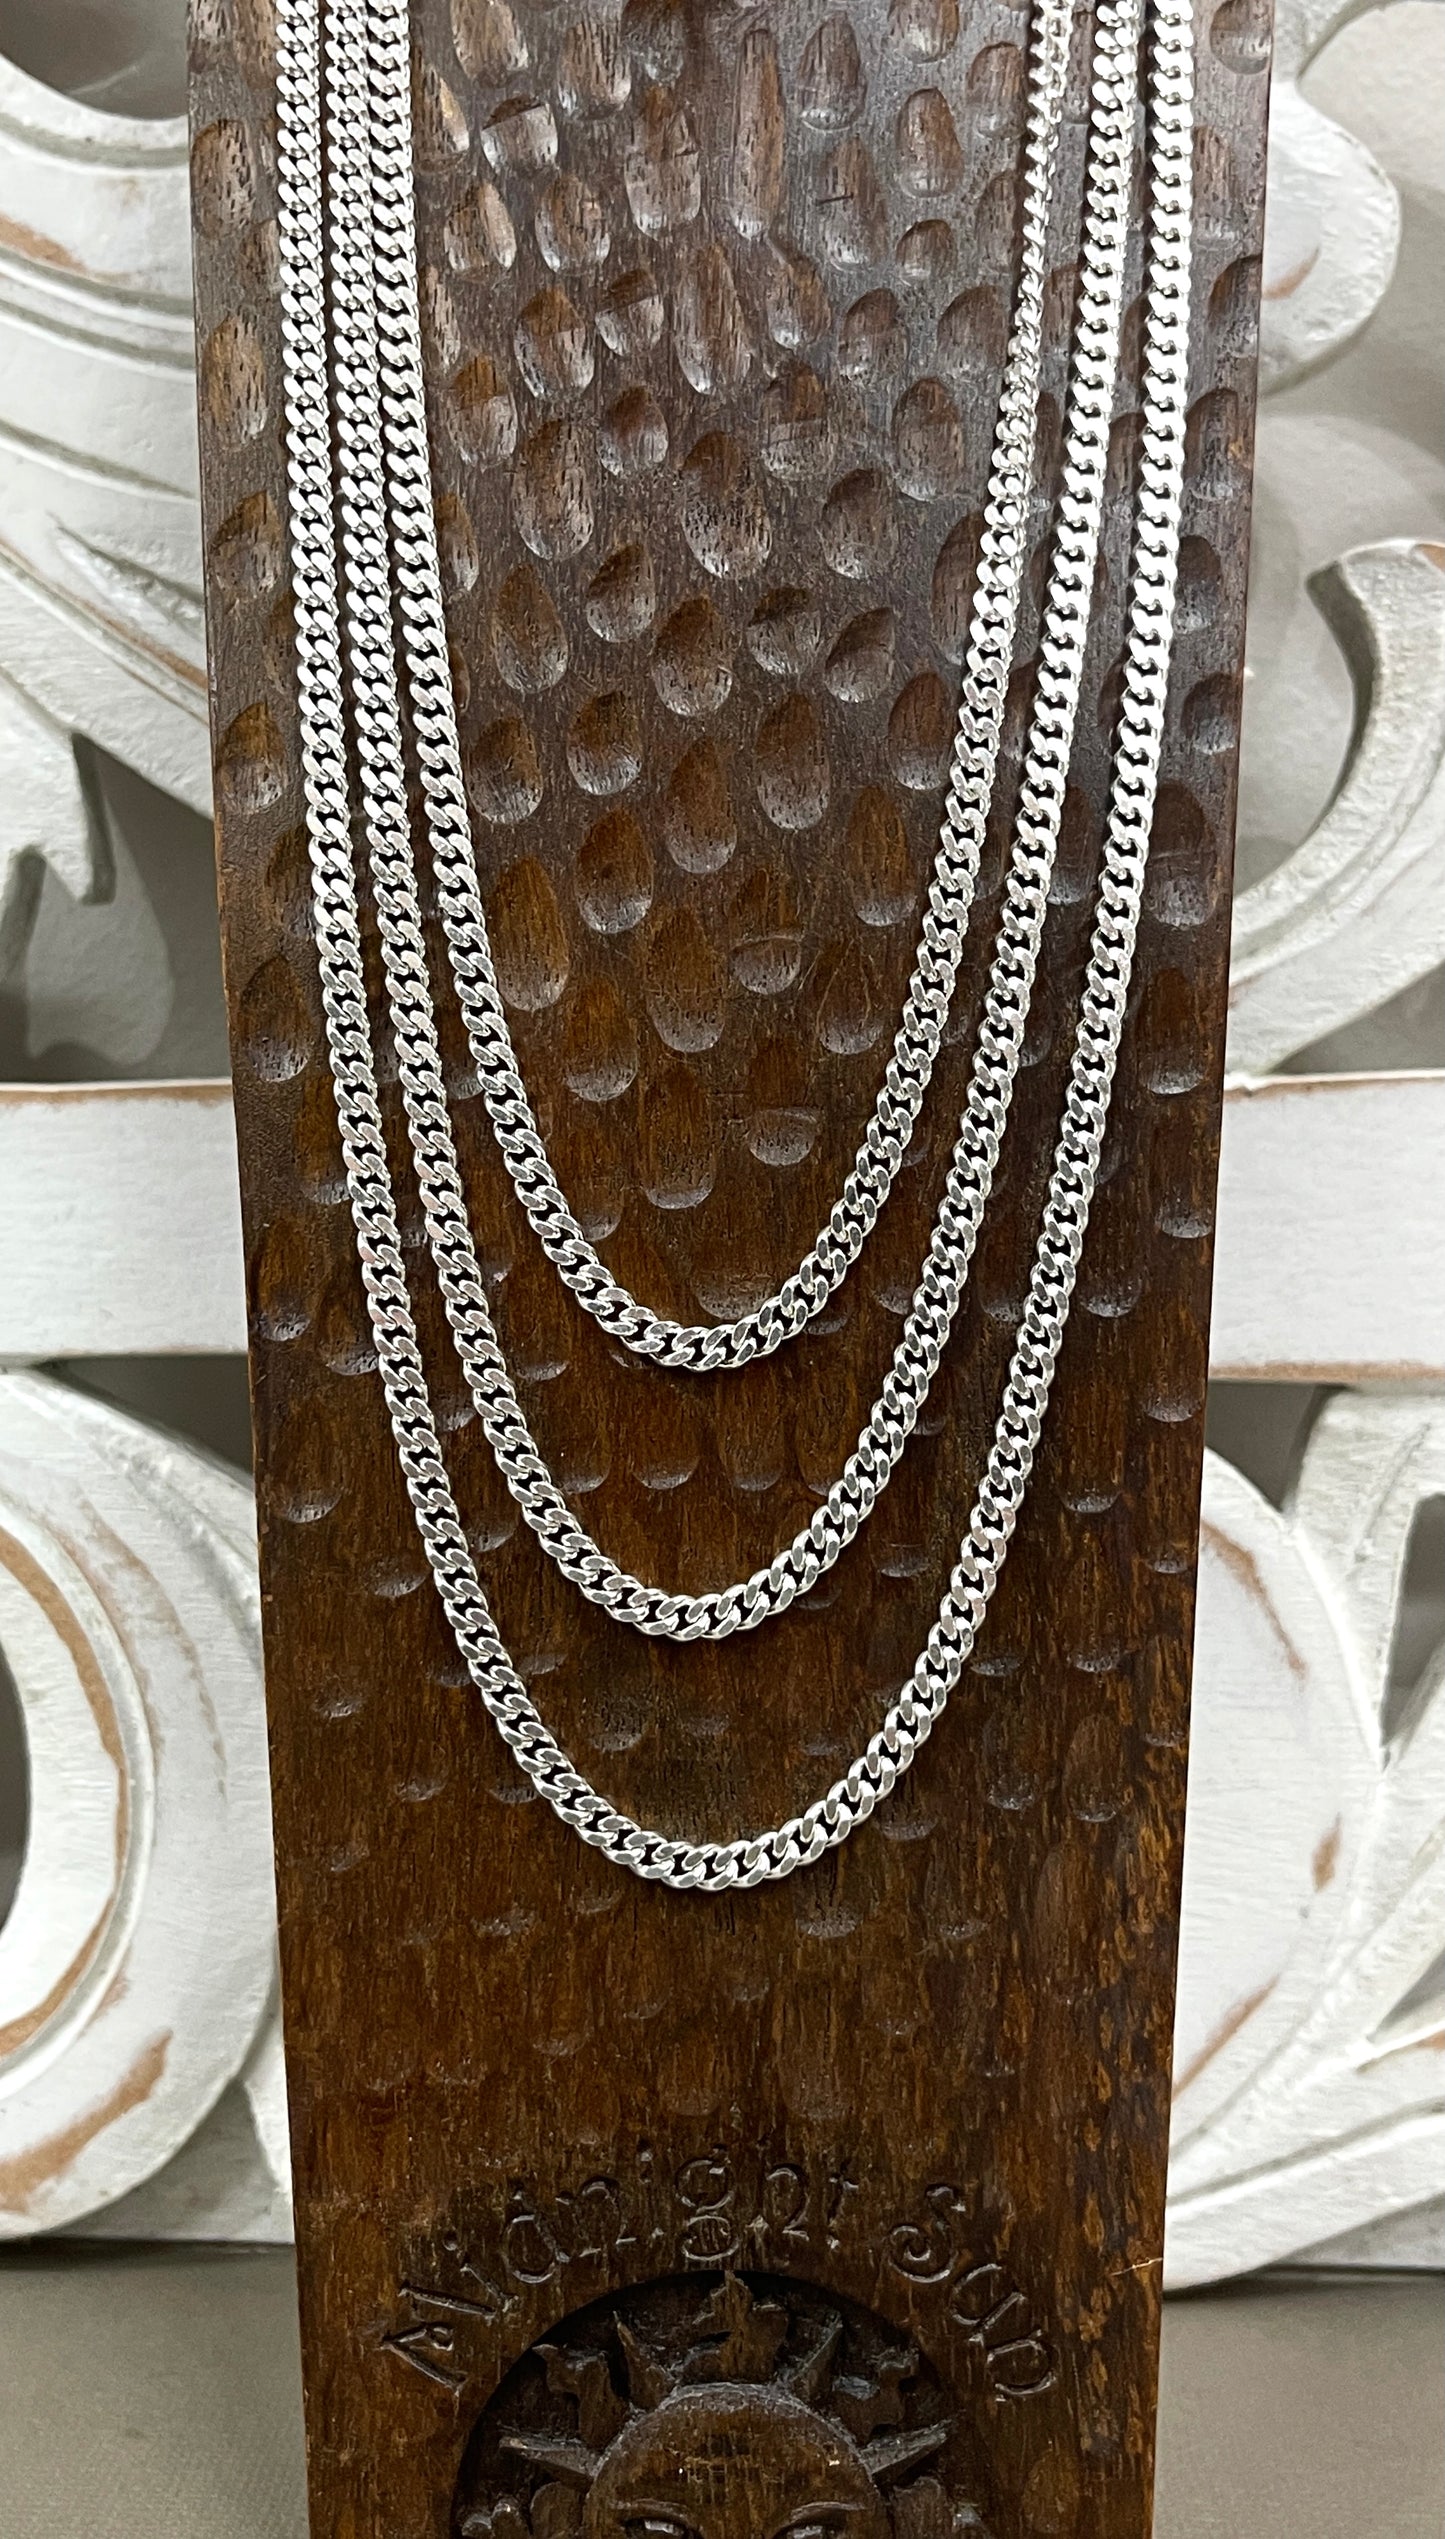 4mm Sterling Curb Chains - 18"-24"